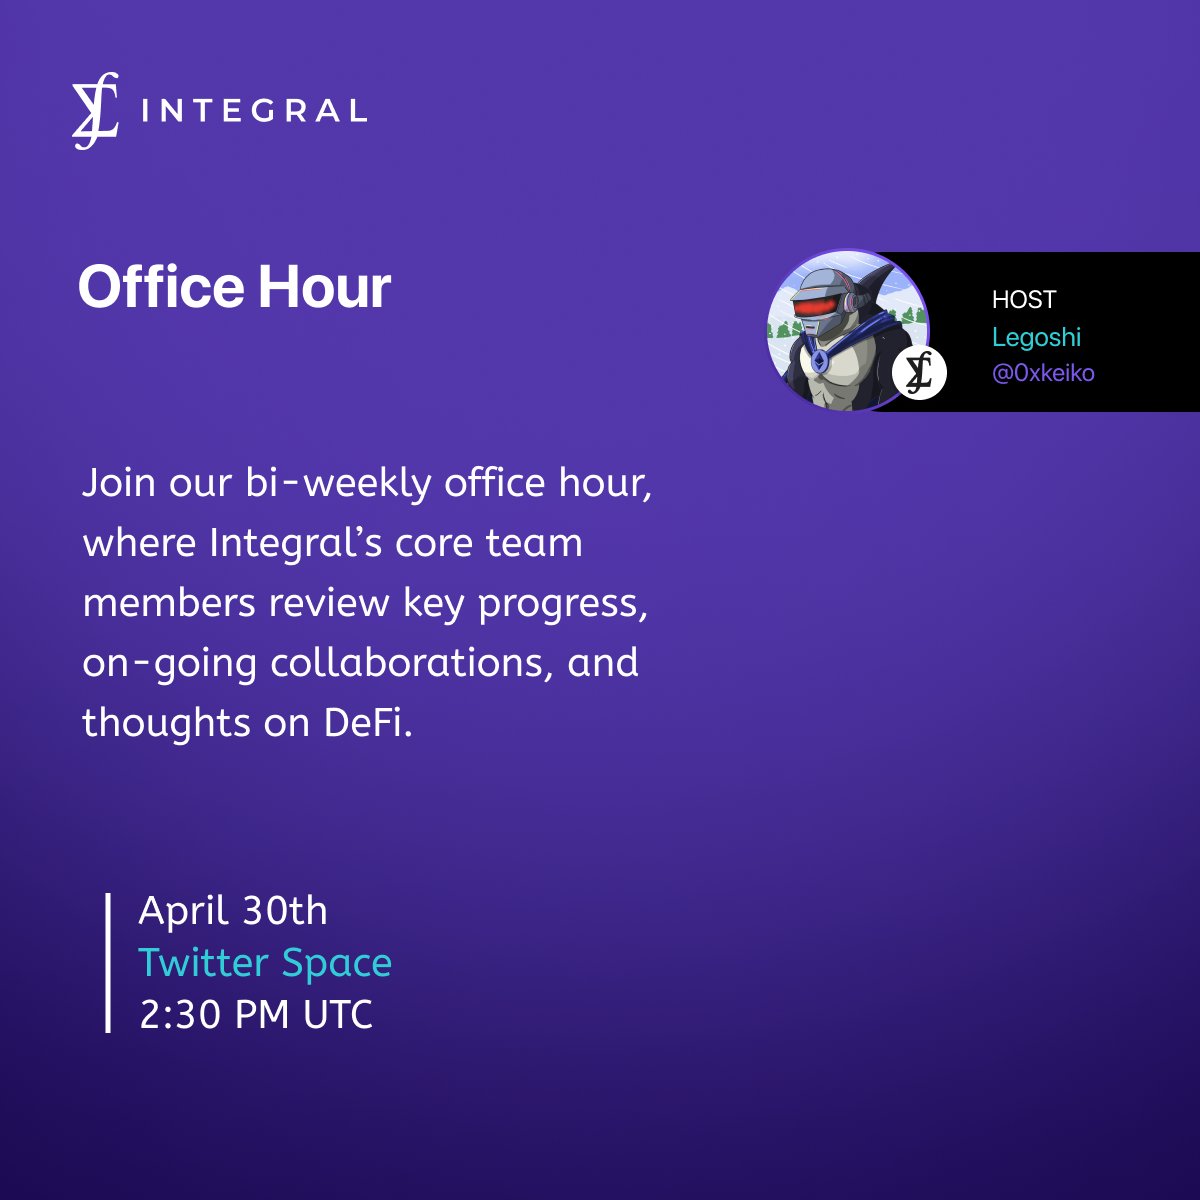 Join us tomorrow, 4/30, at 2:30 PM UTC for Office Hour. Don't forget to mint an OAT for participating! ⏰ Apr 30, Tue, 2:30 PM UTC 🔗 app.galxe.com/quest/Integral…